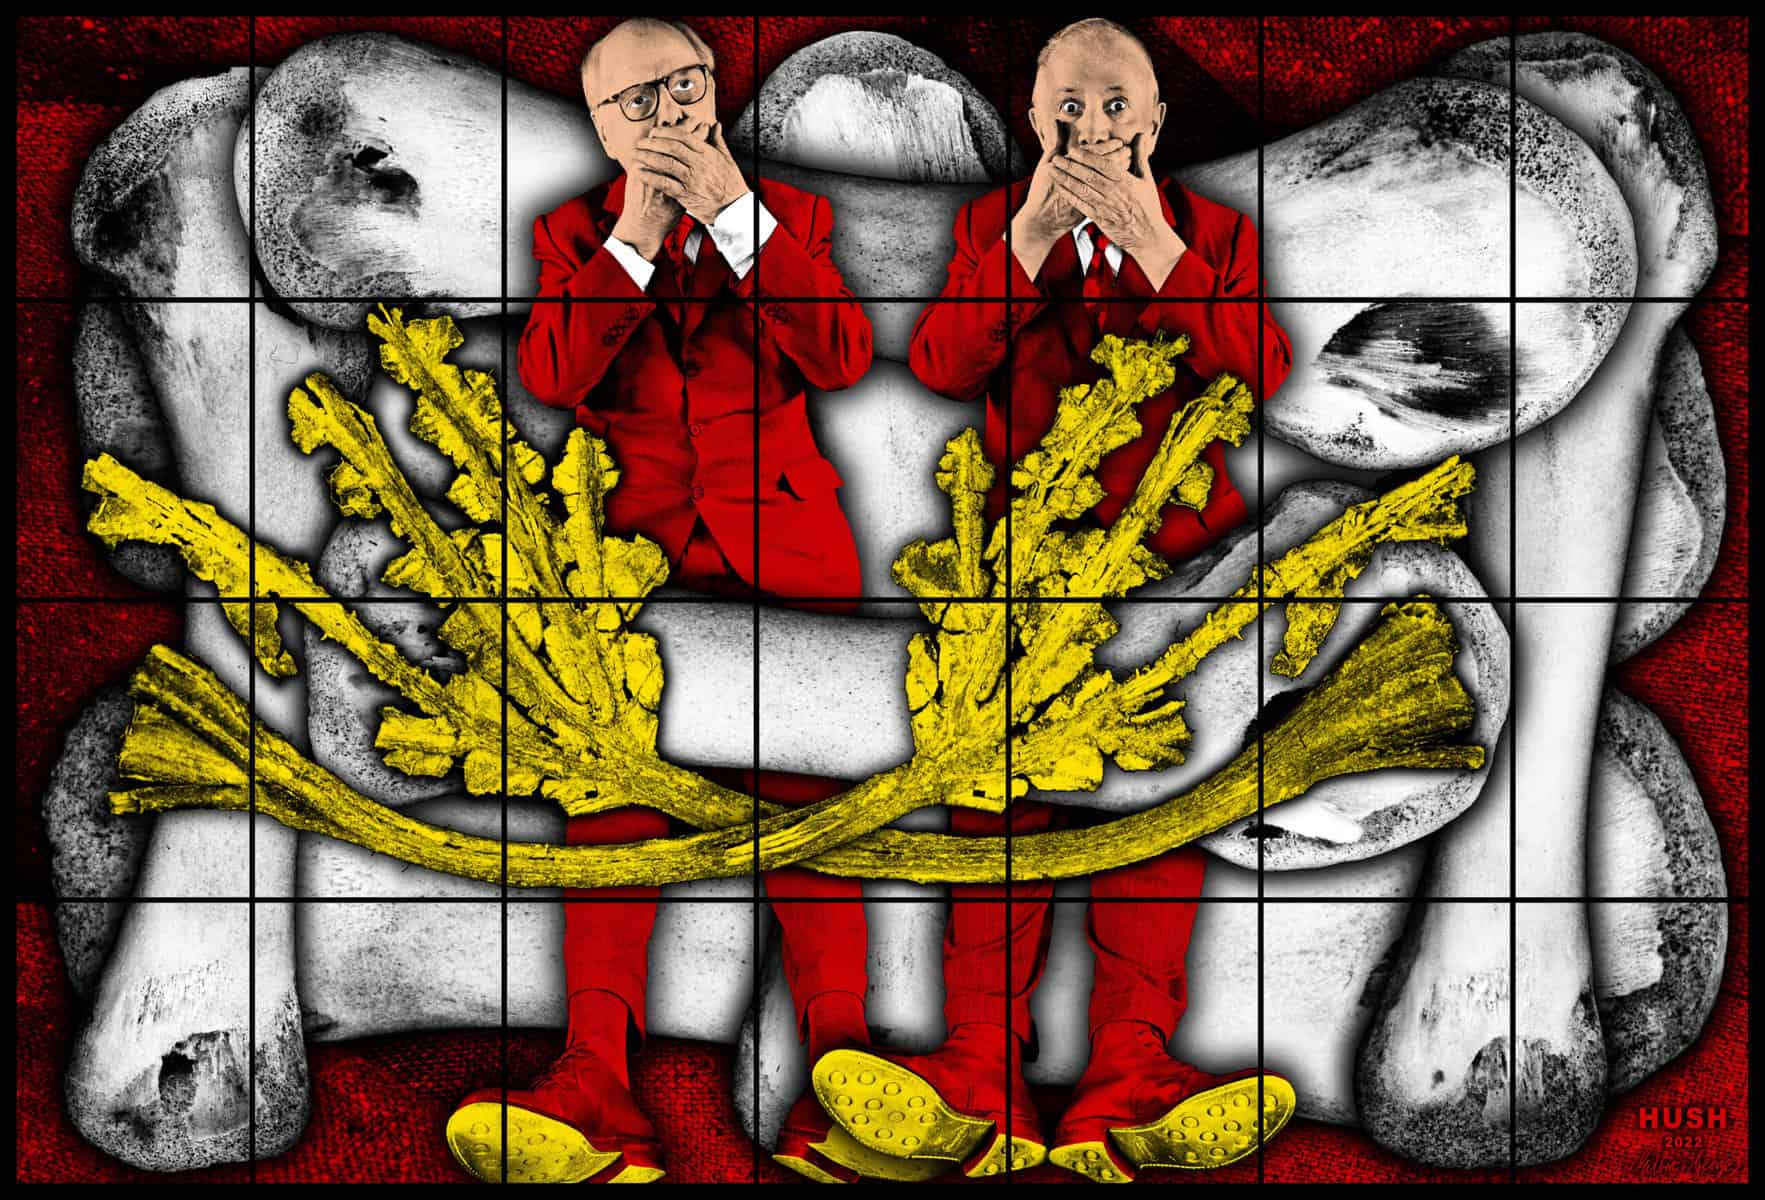 Gilbert & George at the Louis Vuitton Foundation in Paris